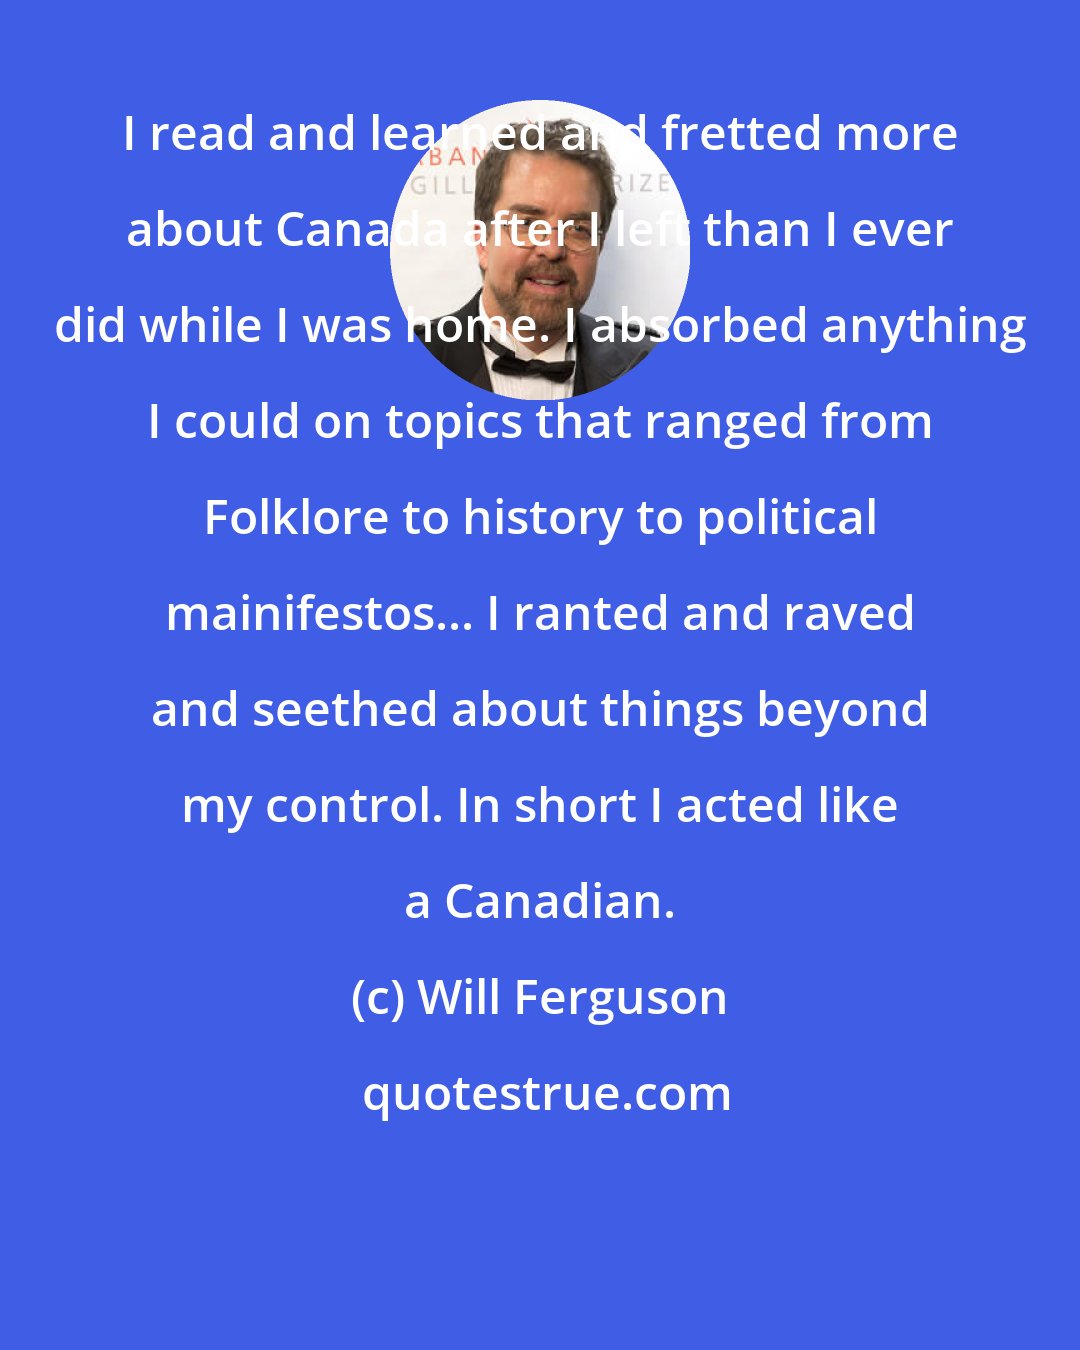 Will Ferguson: I read and learned and fretted more about Canada after I left than I ever did while I was home. I absorbed anything I could on topics that ranged from Folklore to history to political mainifestos... I ranted and raved and seethed about things beyond my control. In short I acted like a Canadian.